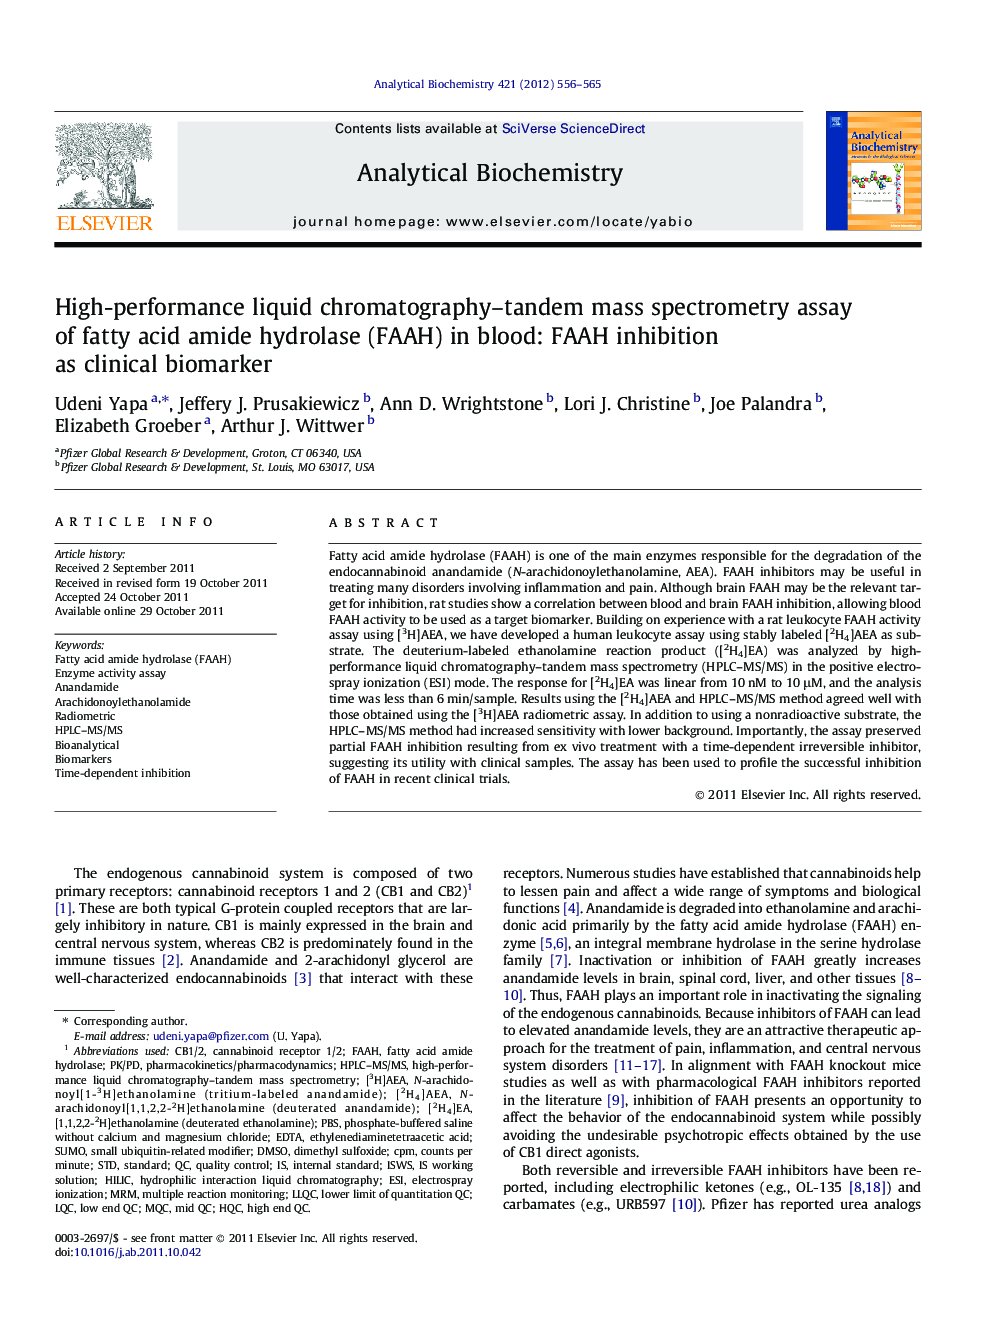 High-performance liquid chromatography-tandem mass spectrometry assay of fatty acid amide hydrolase (FAAH) in blood: FAAH inhibition as clinical biomarker